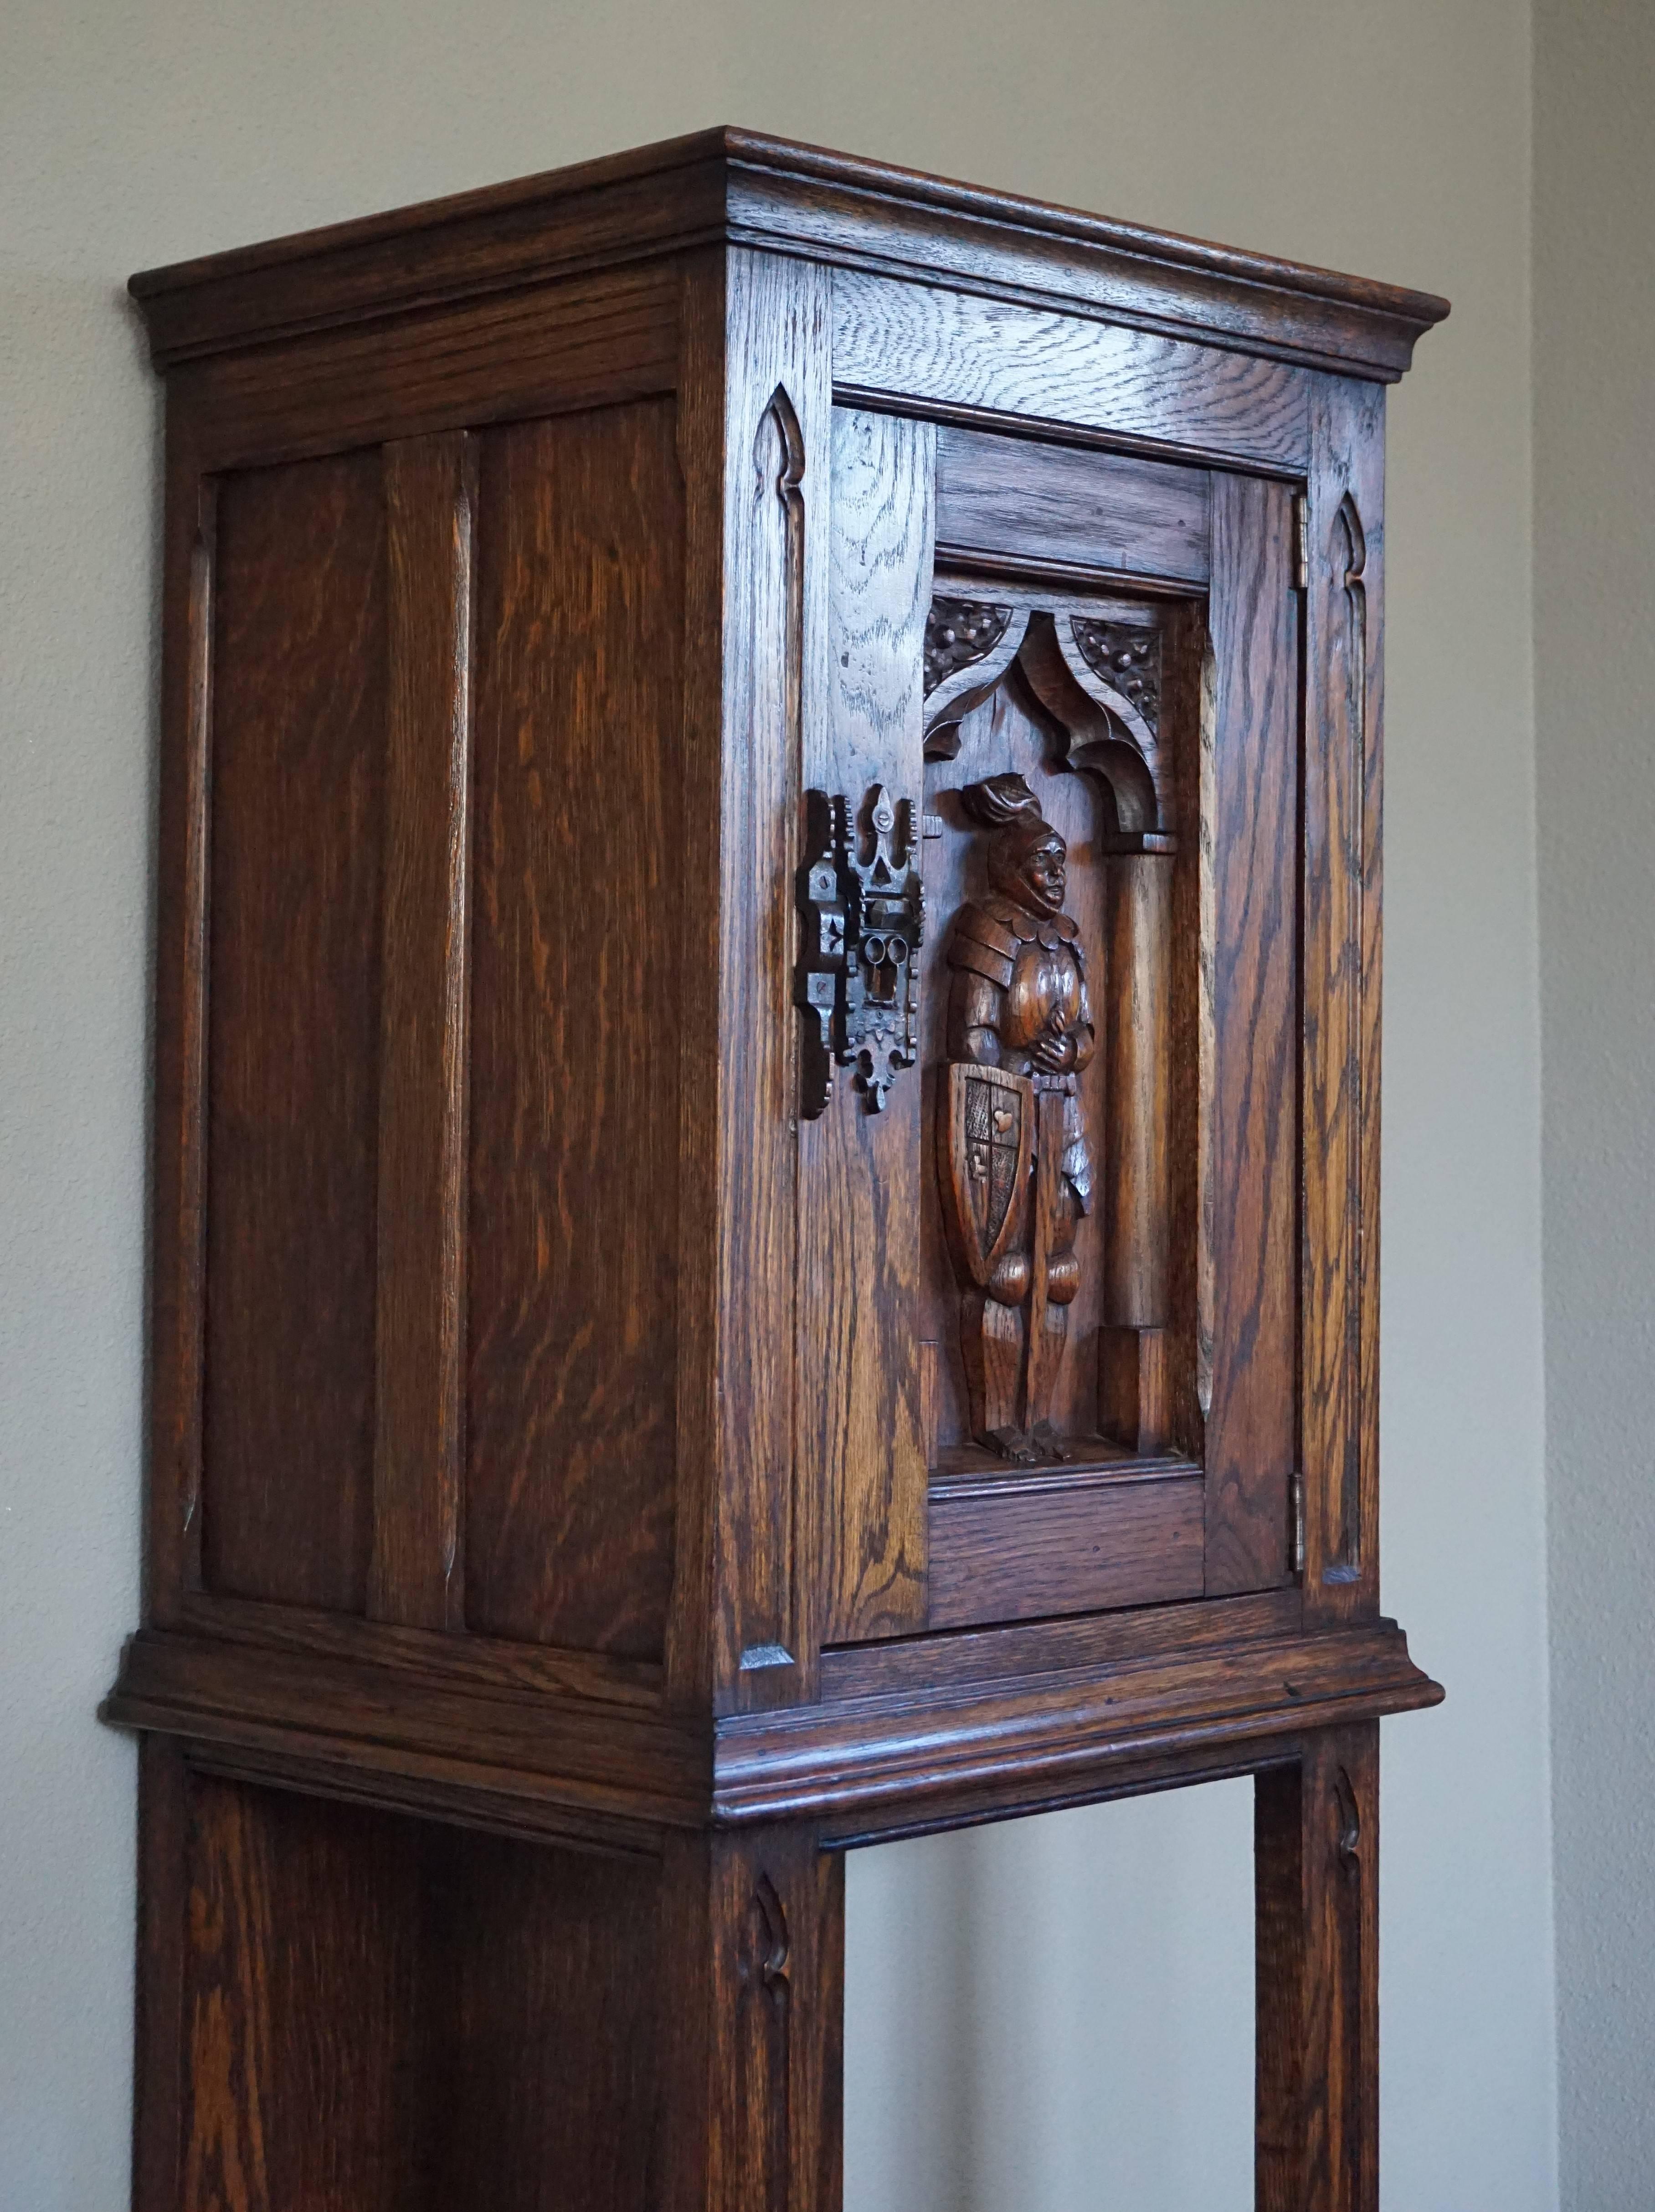 Marvelous and practical Gothic Revival drinks cabinet.

This rare Dutch Gothic dry bar is in excellent condition and it is beautifully carved. The Knight in full armor looks like he is guarding the gate of a castle, because the door of this cabinet